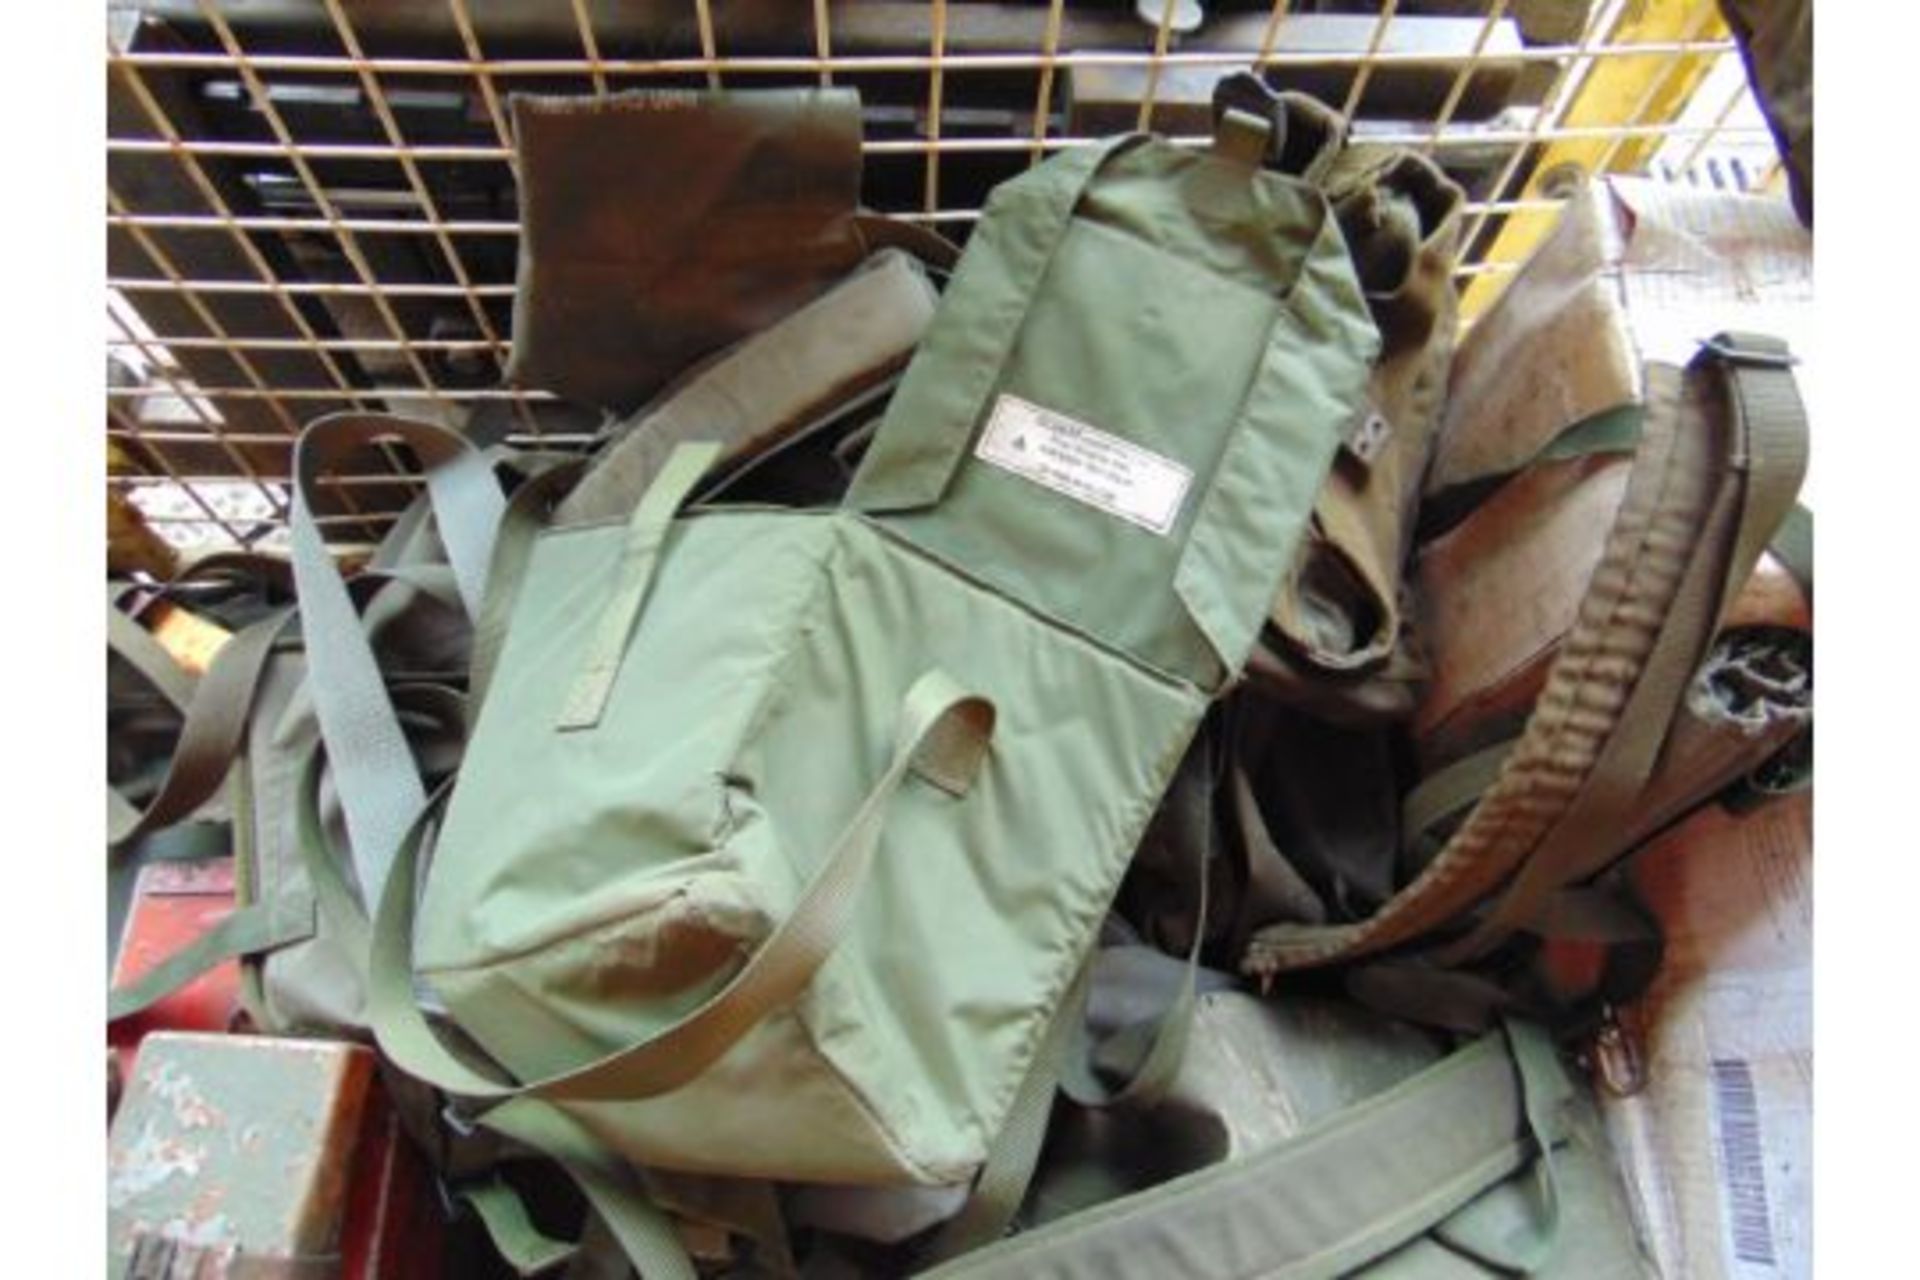 Stillage of Tools, Bags, Fixings, Spares etc. - Image 4 of 4